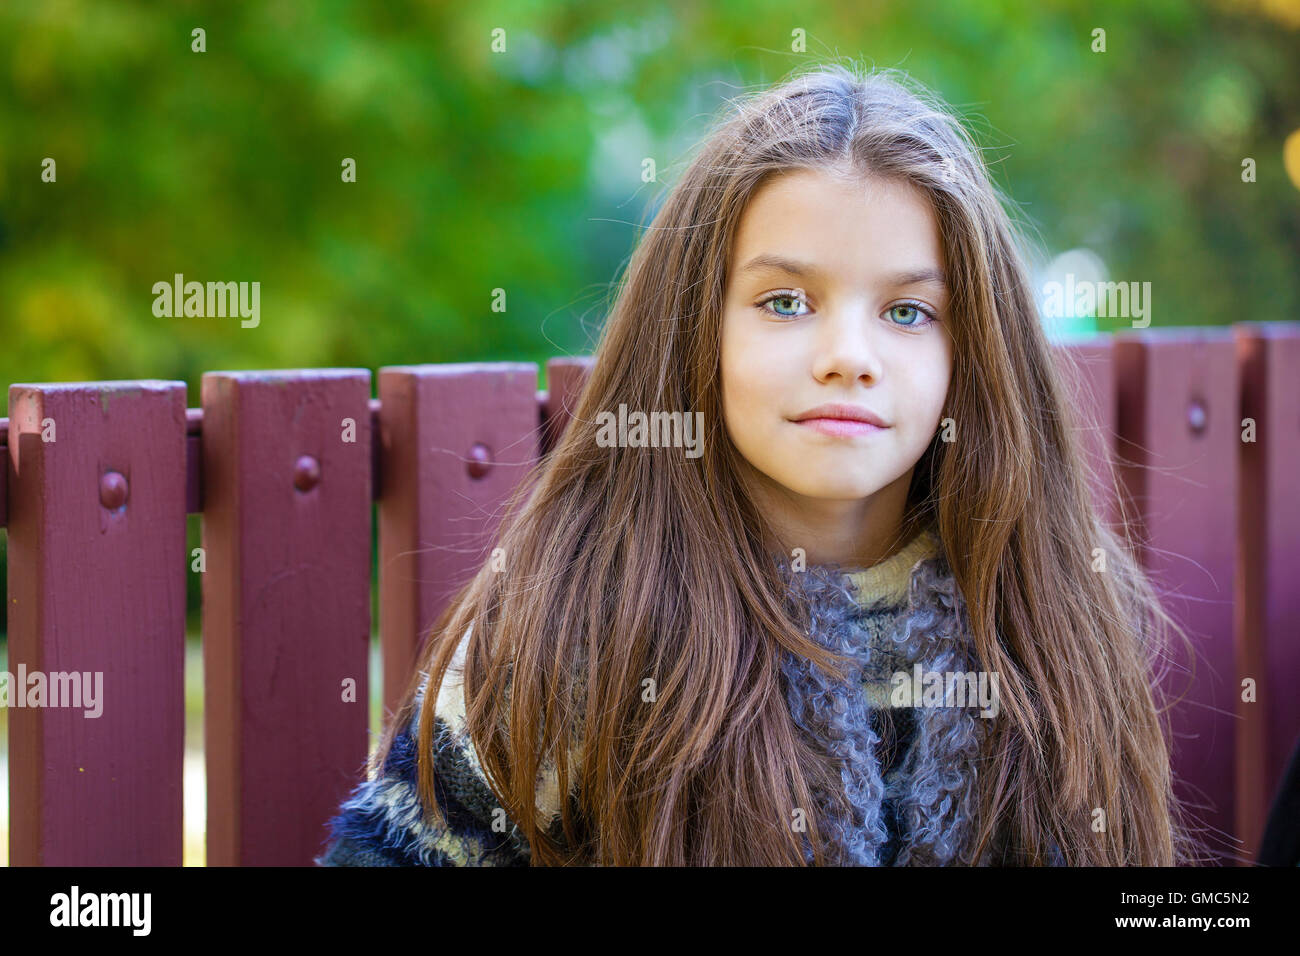 9+ Thousand Cute 10 Year Old Girl Royalty-Free Images, Stock